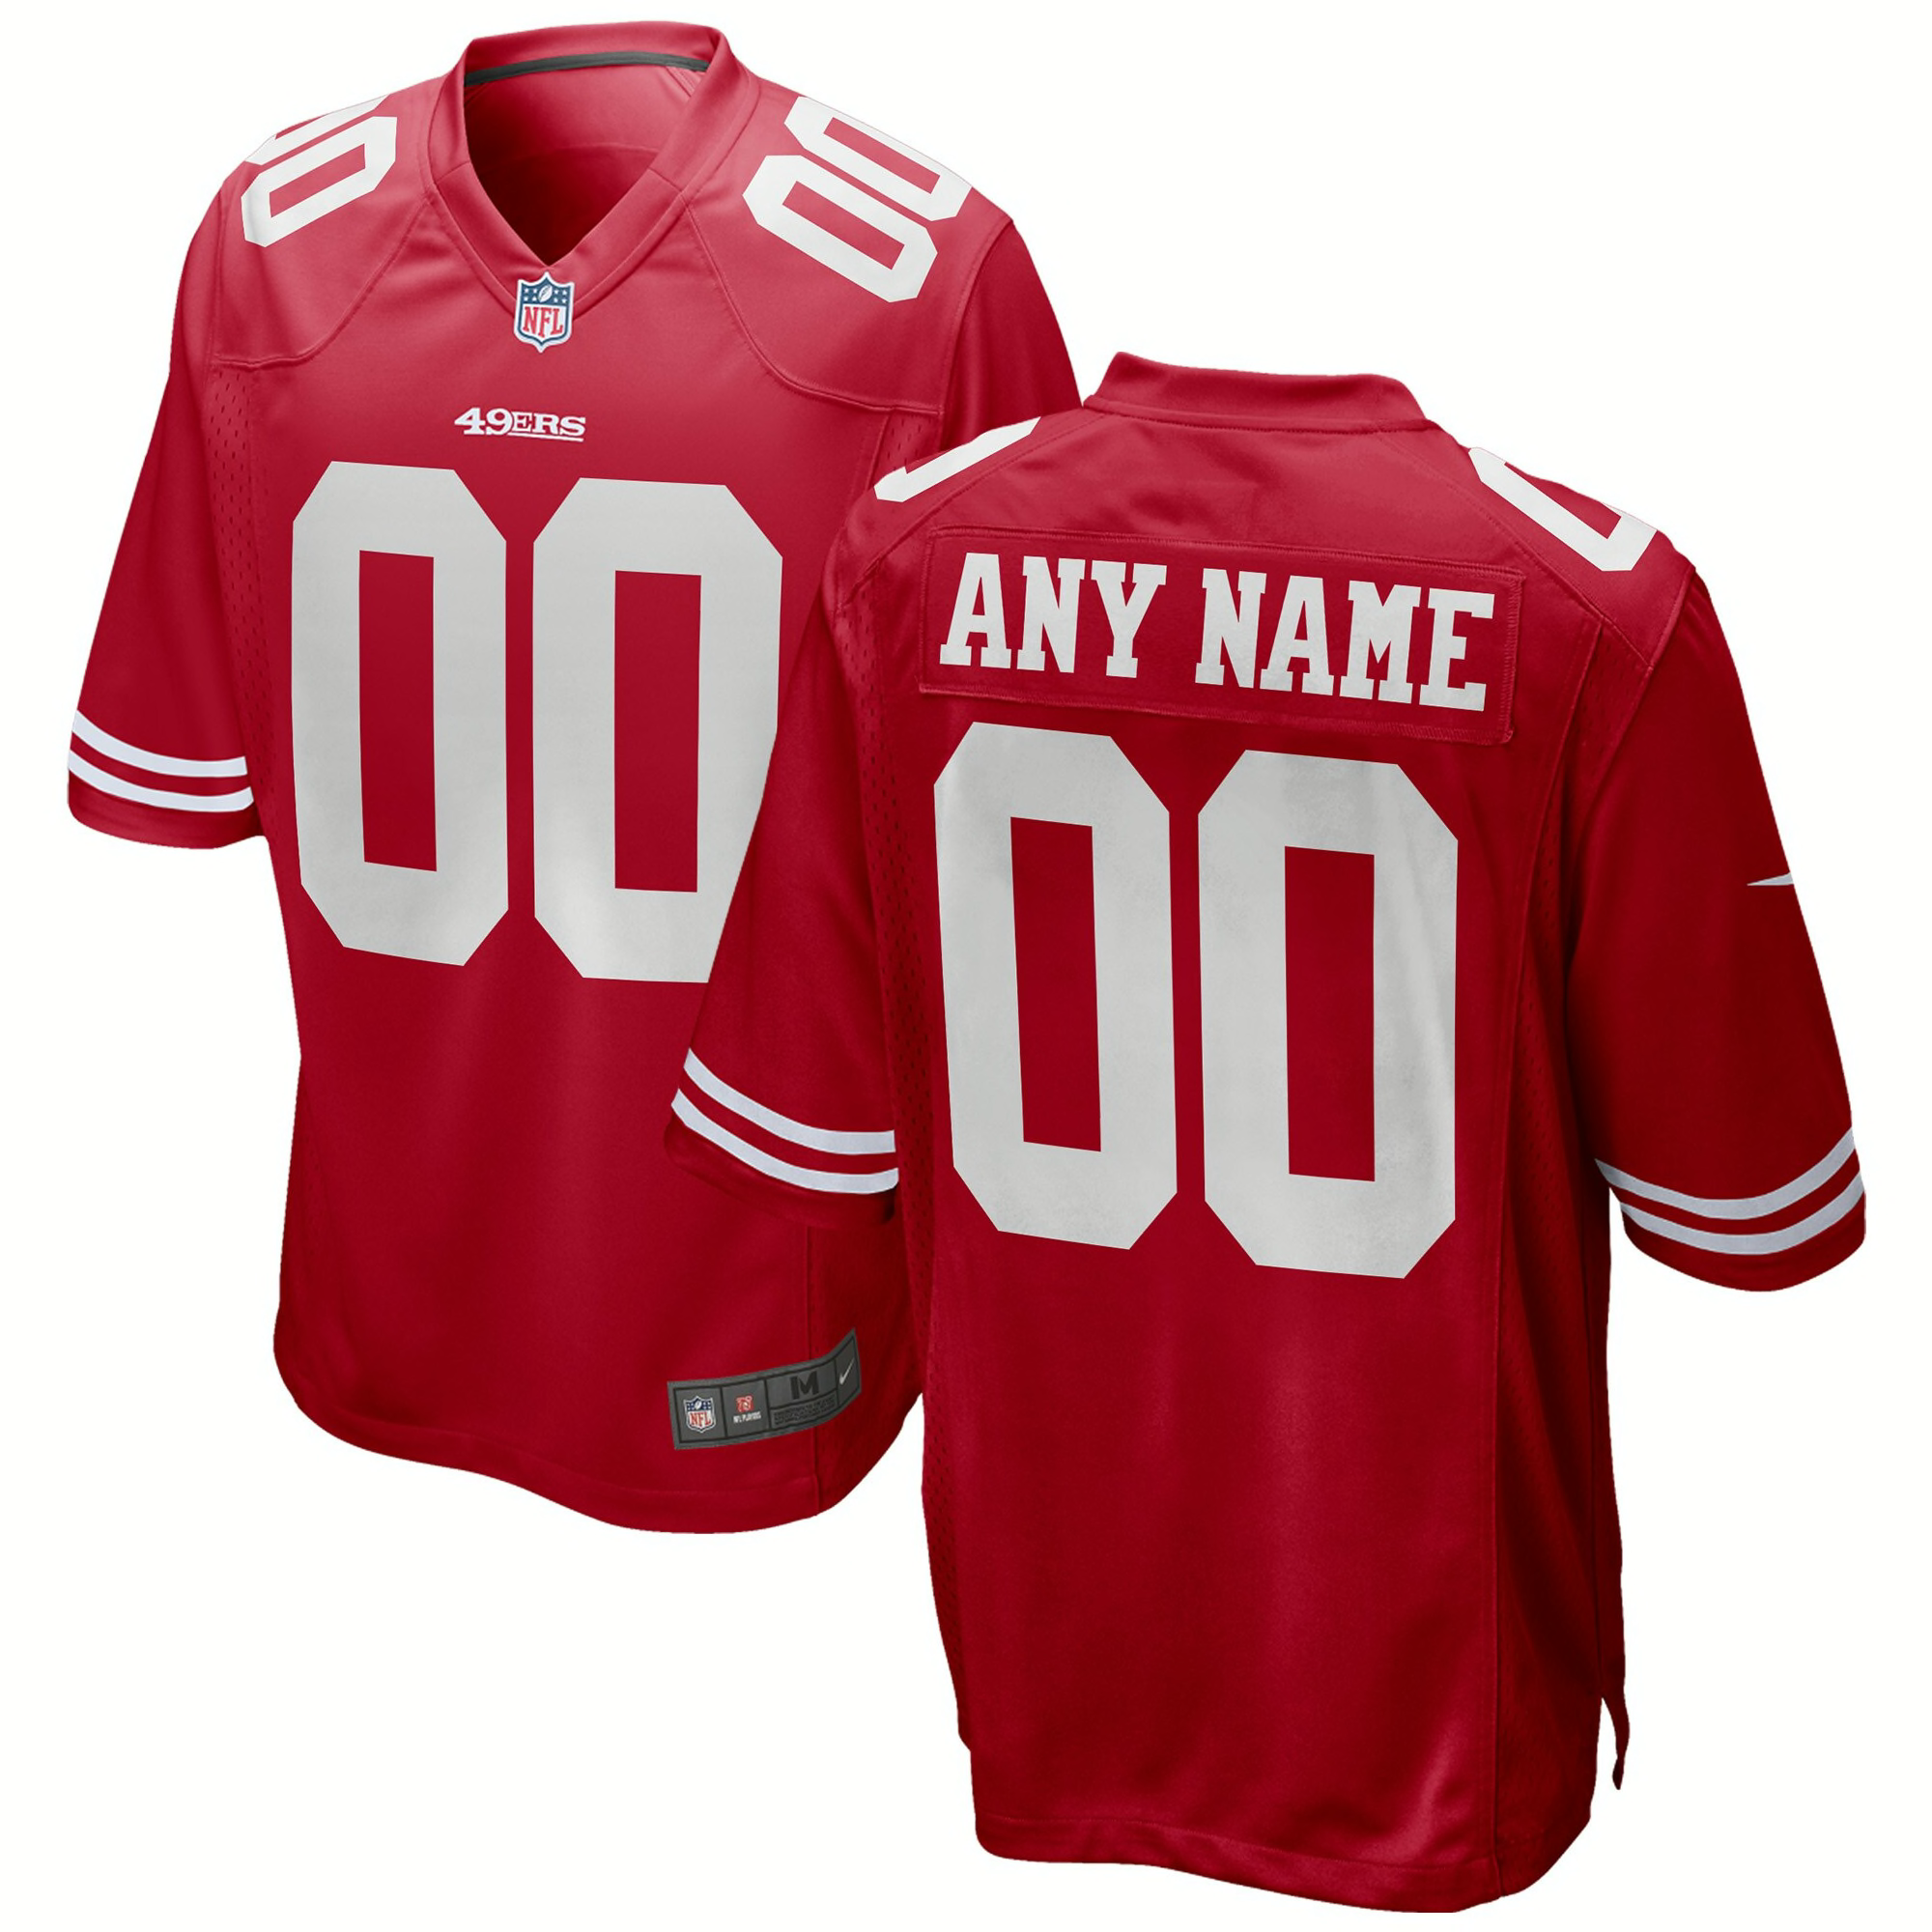 2020 49ers jersey